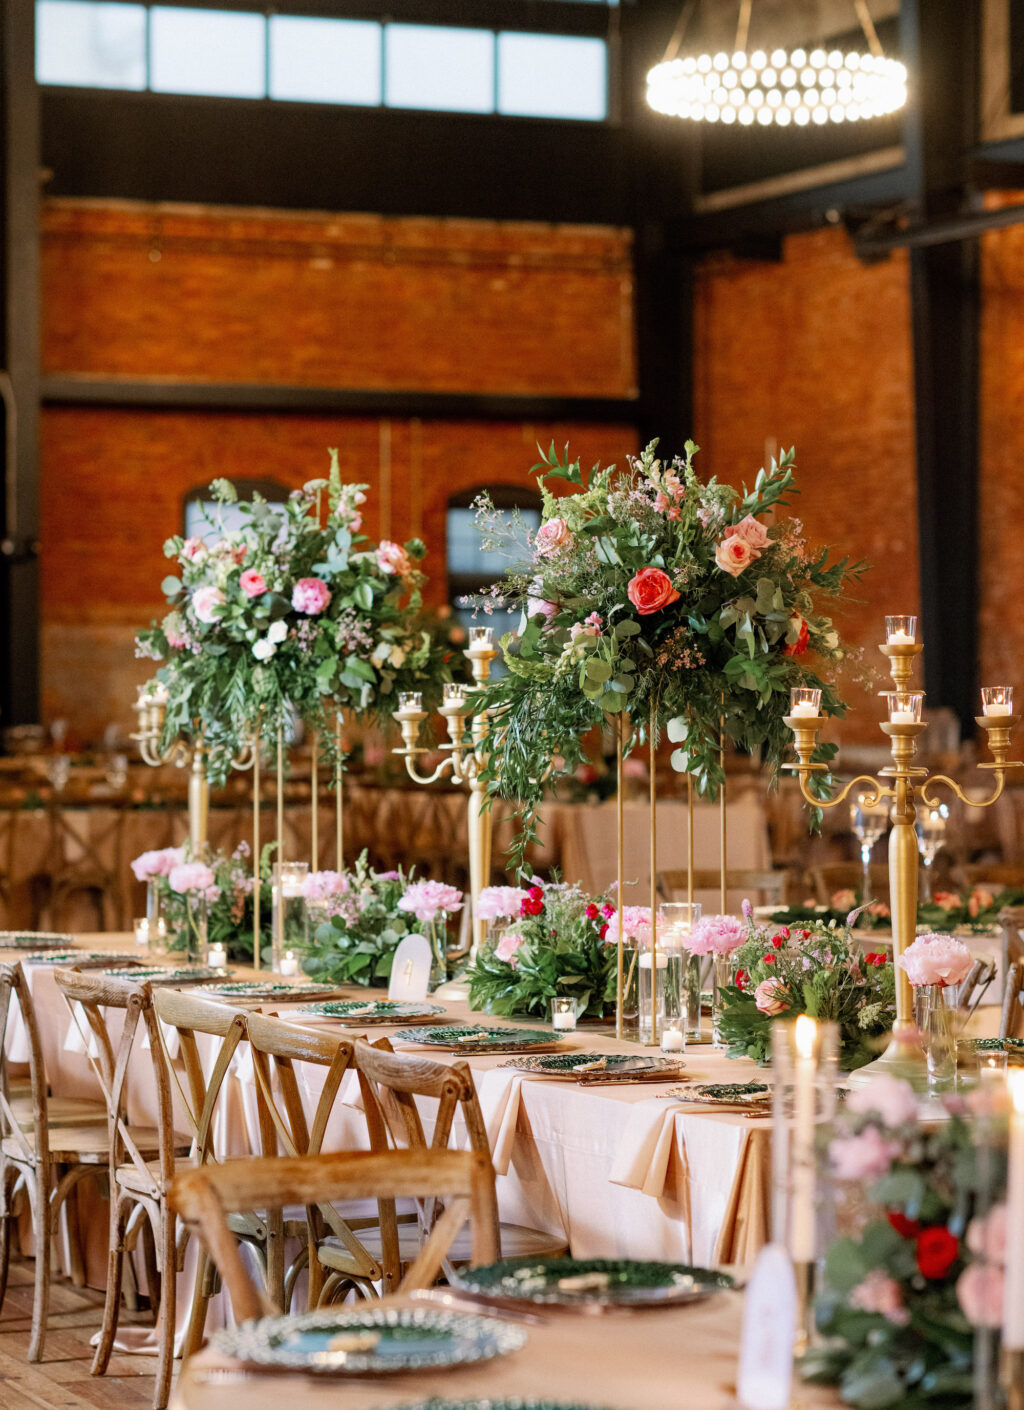 Gold Candelabra | Pink, Red, and White Roses with Eucalyptus Greenery in Gold Tall Stands | Long Feasting Tables | Indian Wedding Reception Decor Inspiration | Tampa Bay Rental A Chair Affair